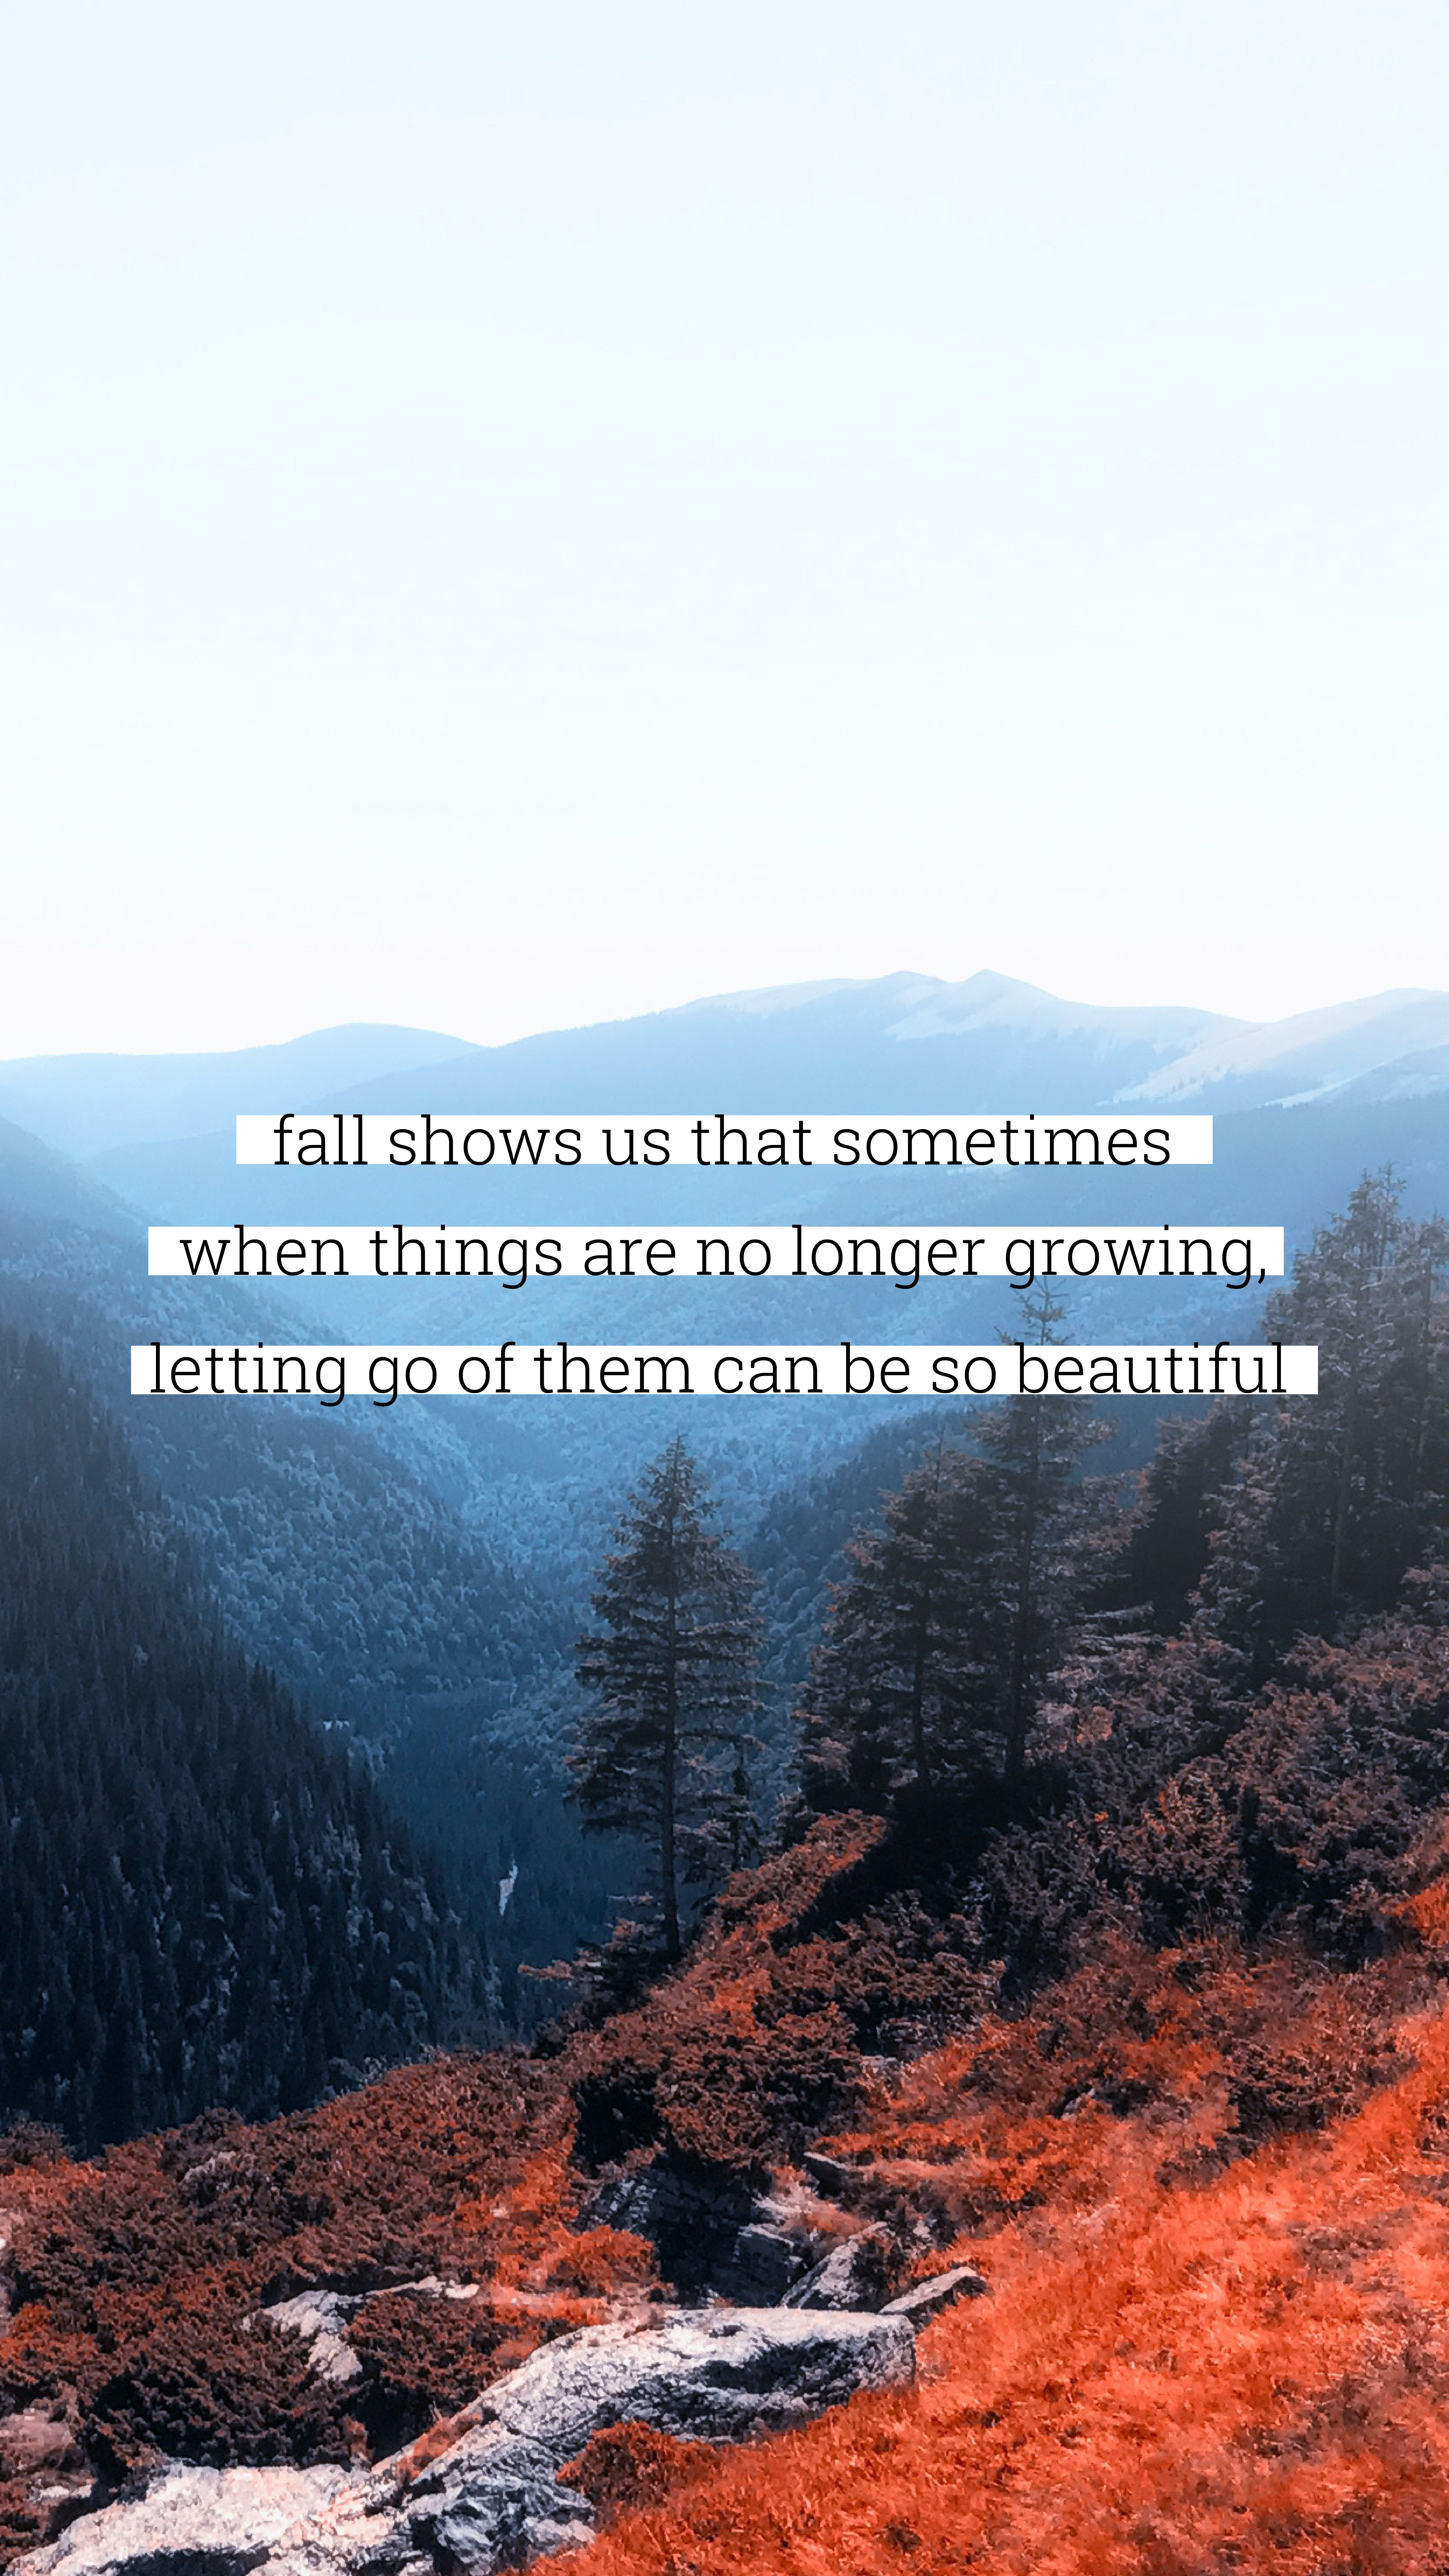 Fall Beautiful Quote Wallpaper / Background for iPhone. Autumn quotes, iPhone background quote, Fall wallpaper